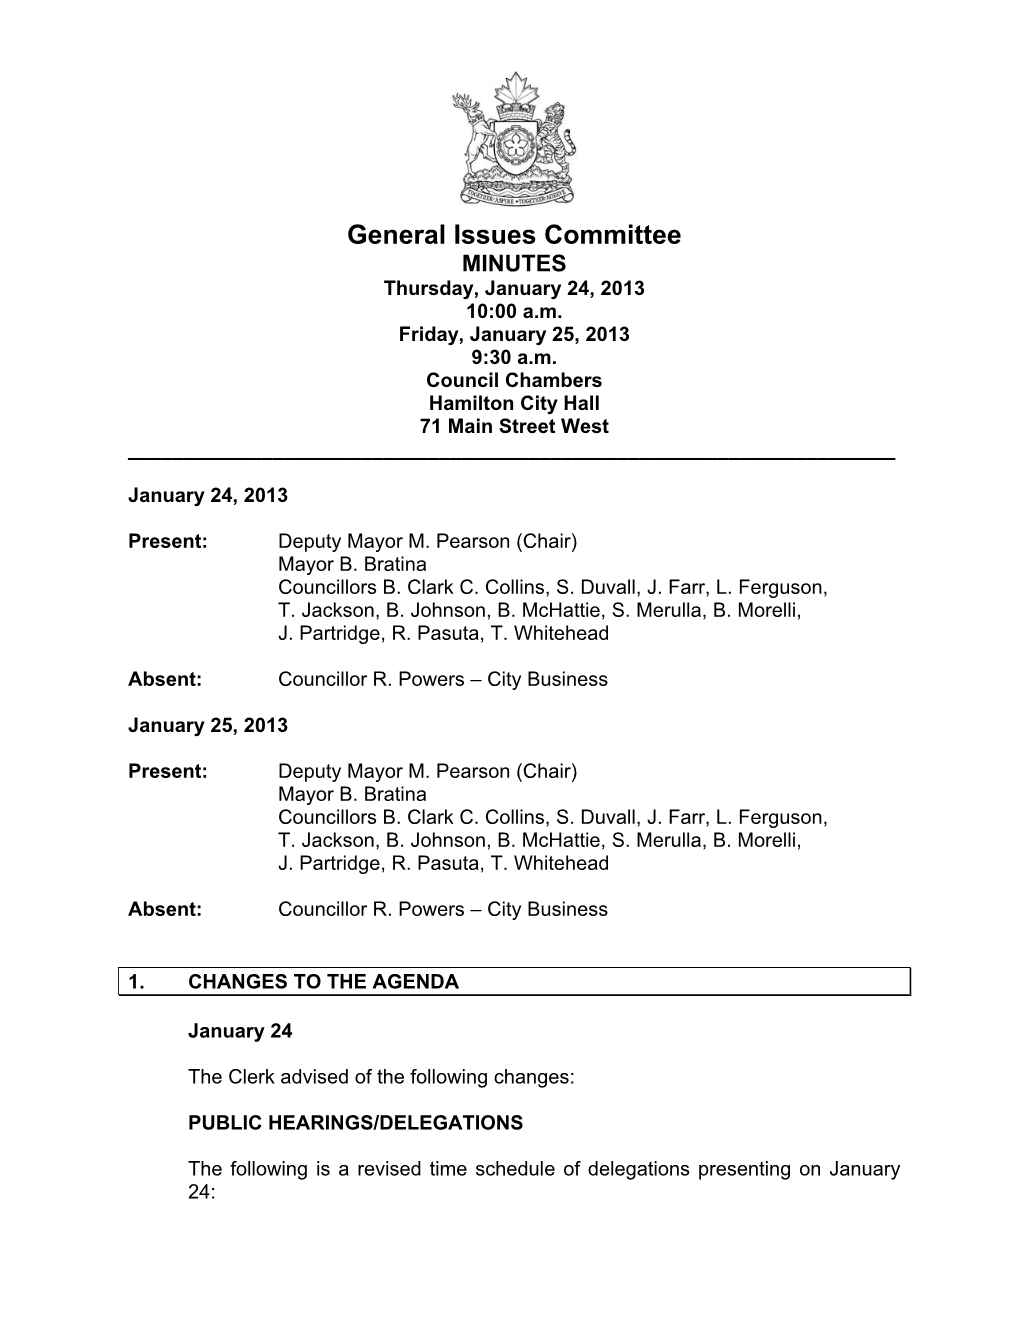 General Issues Committee MINUTES Thursday, January 24, 2013 10:00 A.M